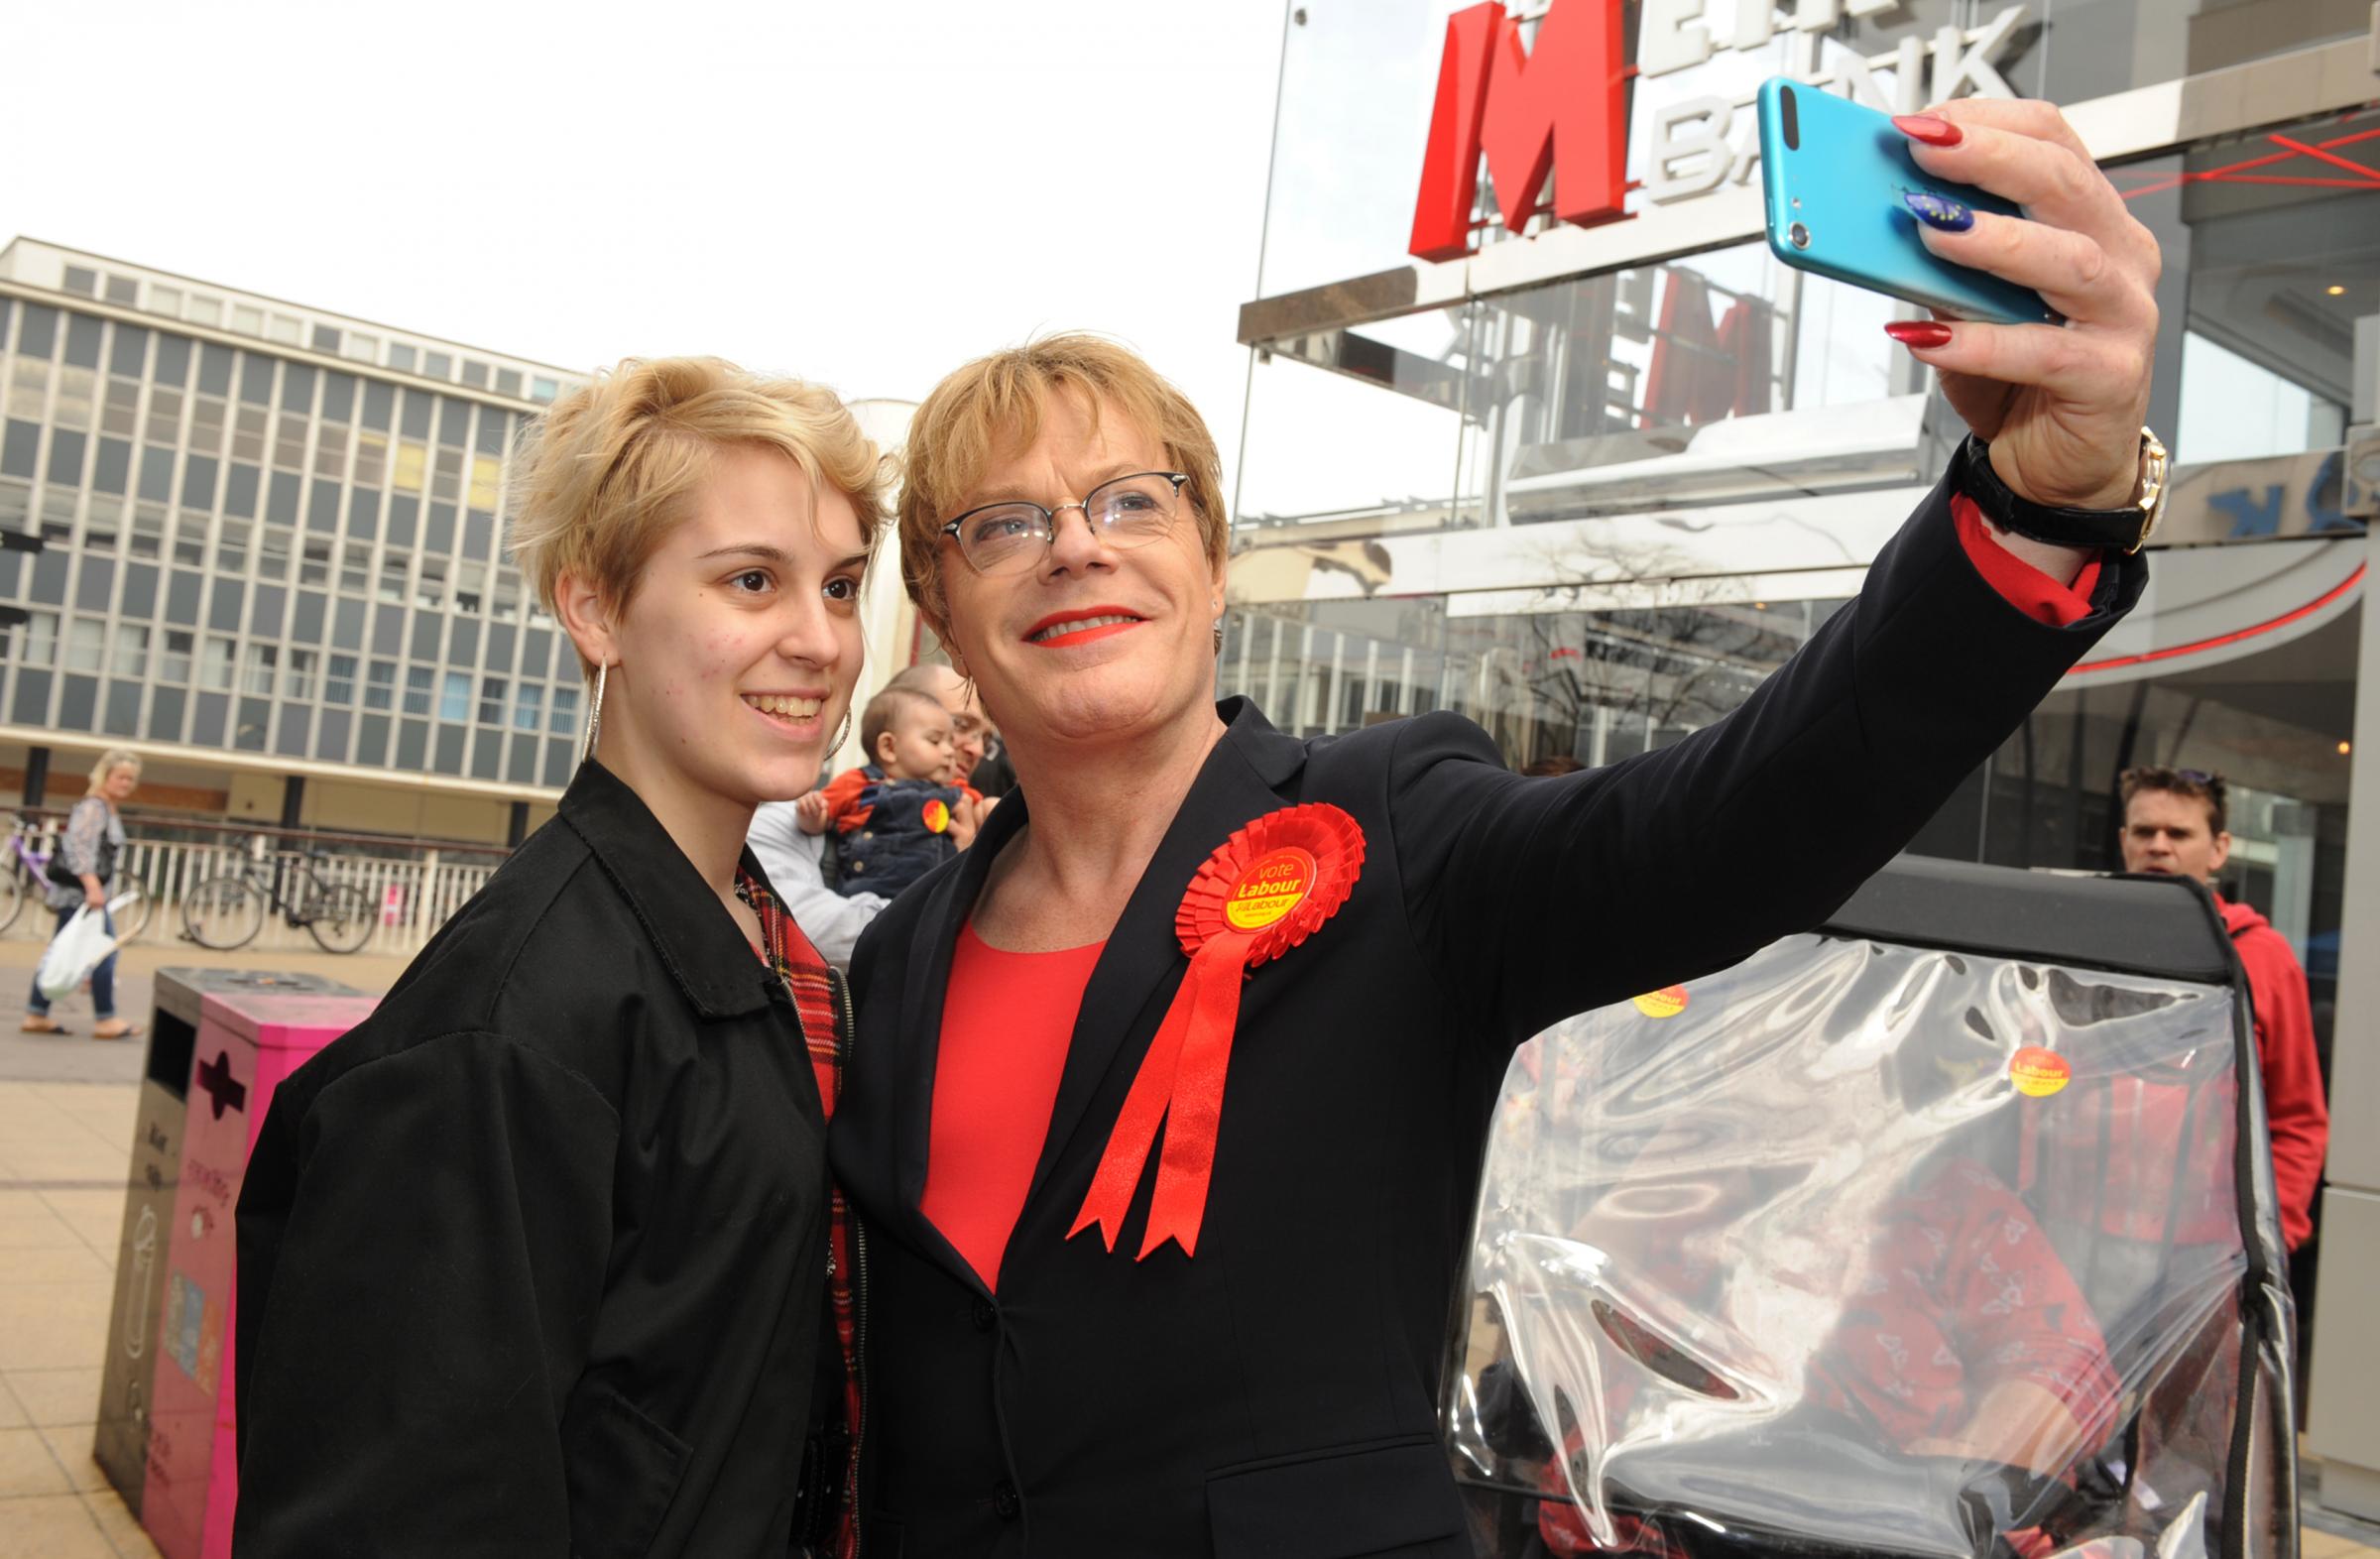 amous face - Eddie Izzard, taking a selfie with Basildon resident Kirsty Pigrum, urges residents to vote for Mike Le Surf in the elections held in 2015